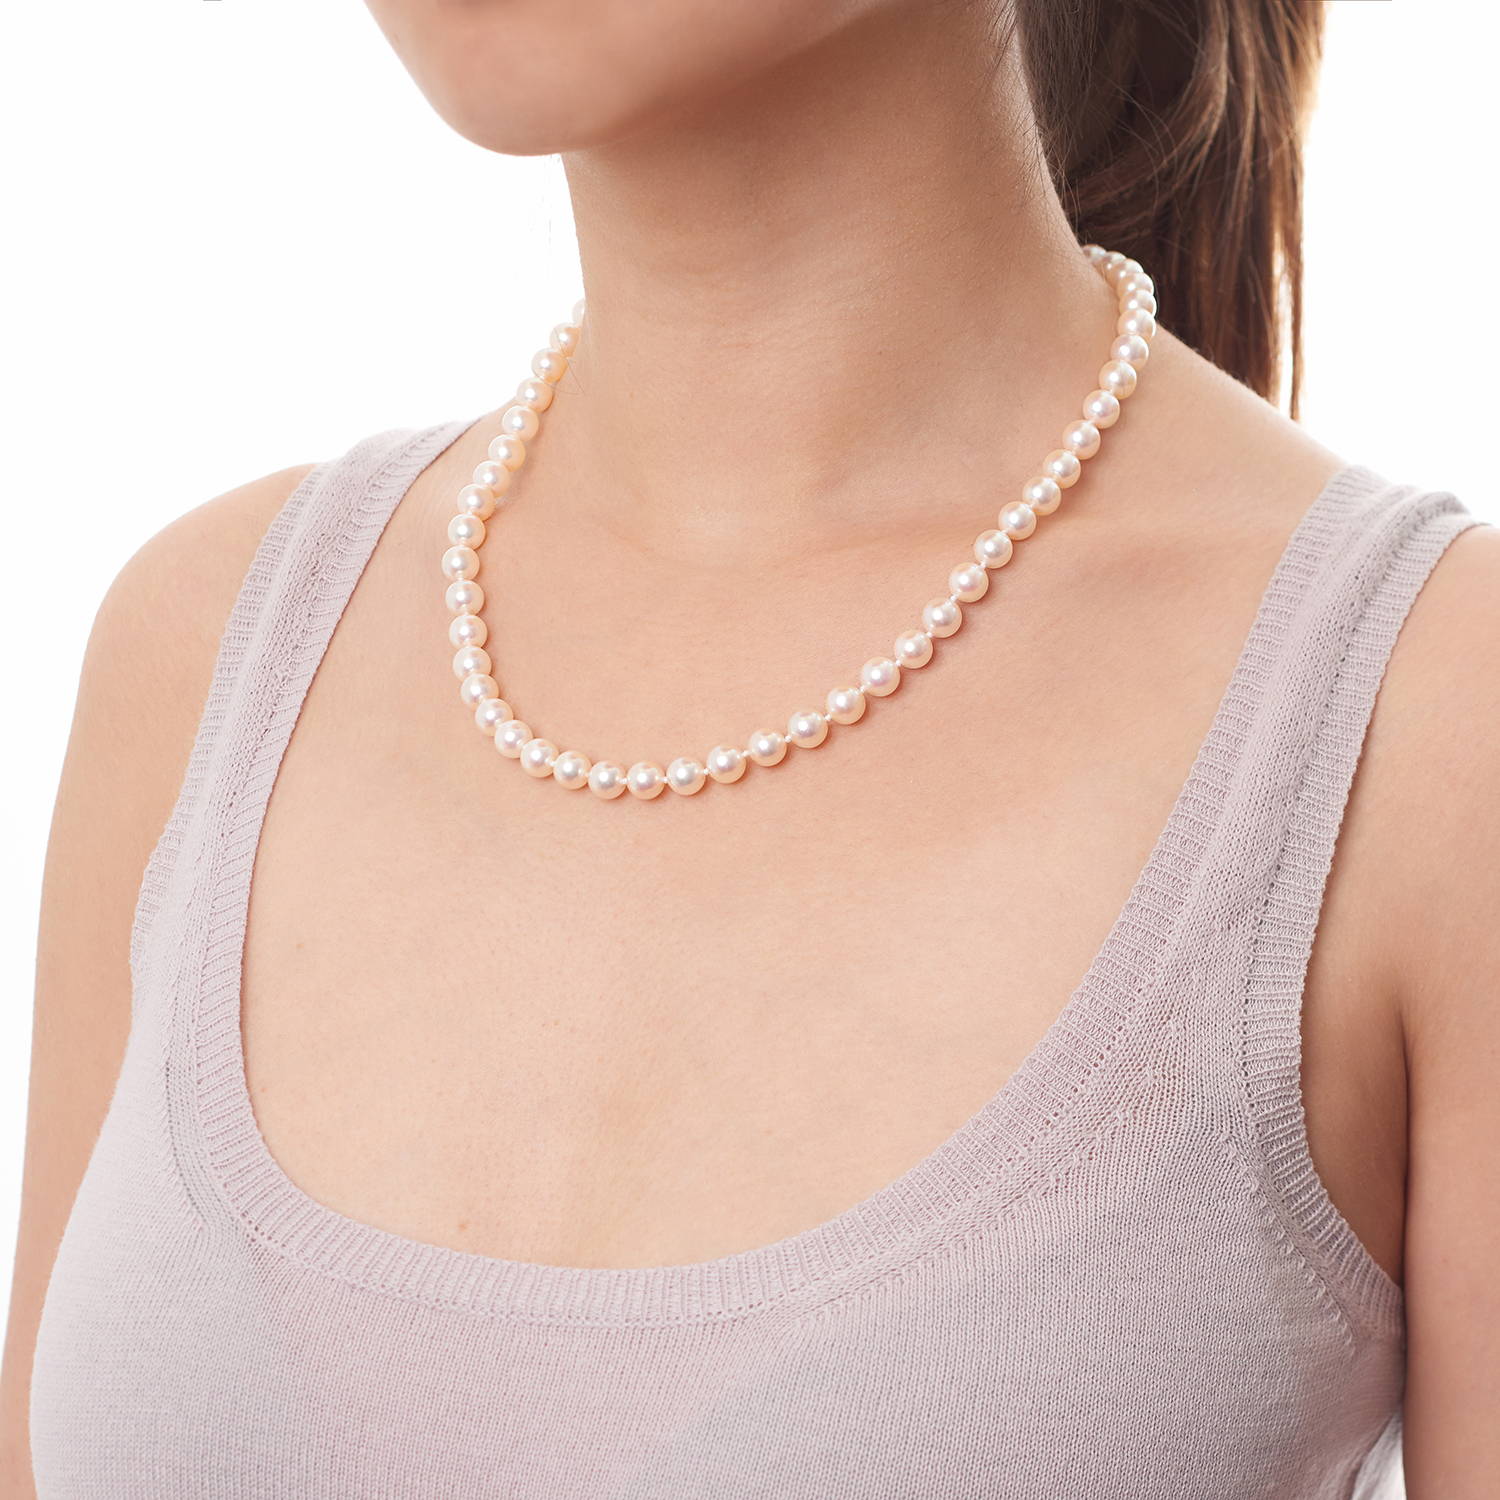 Pearl Necklace Sizes: 7.0-7.5mm